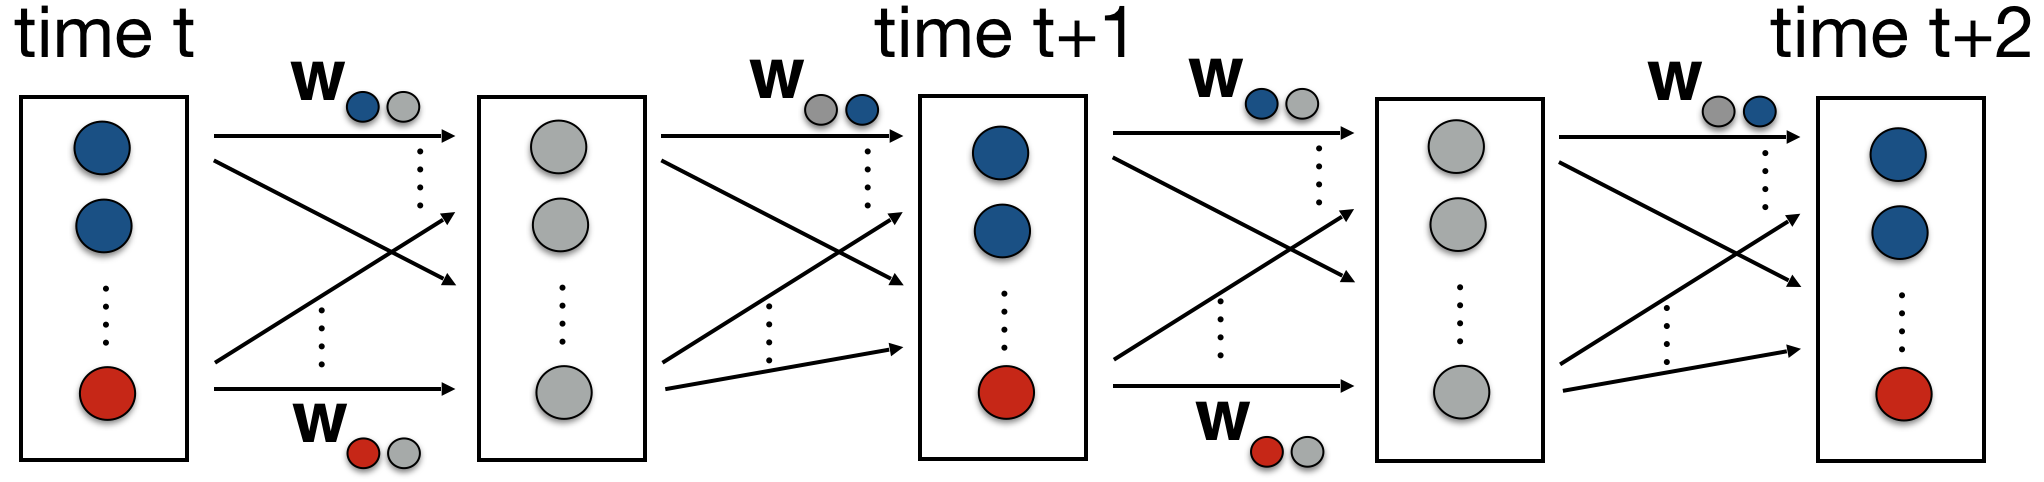 Figure 1: Visualization of the learning and planning framework introduced previously [1] where red circles represent action variables, blue circles represent state variables, gray circles represent the activation units and w's represent the weights of the neural network.